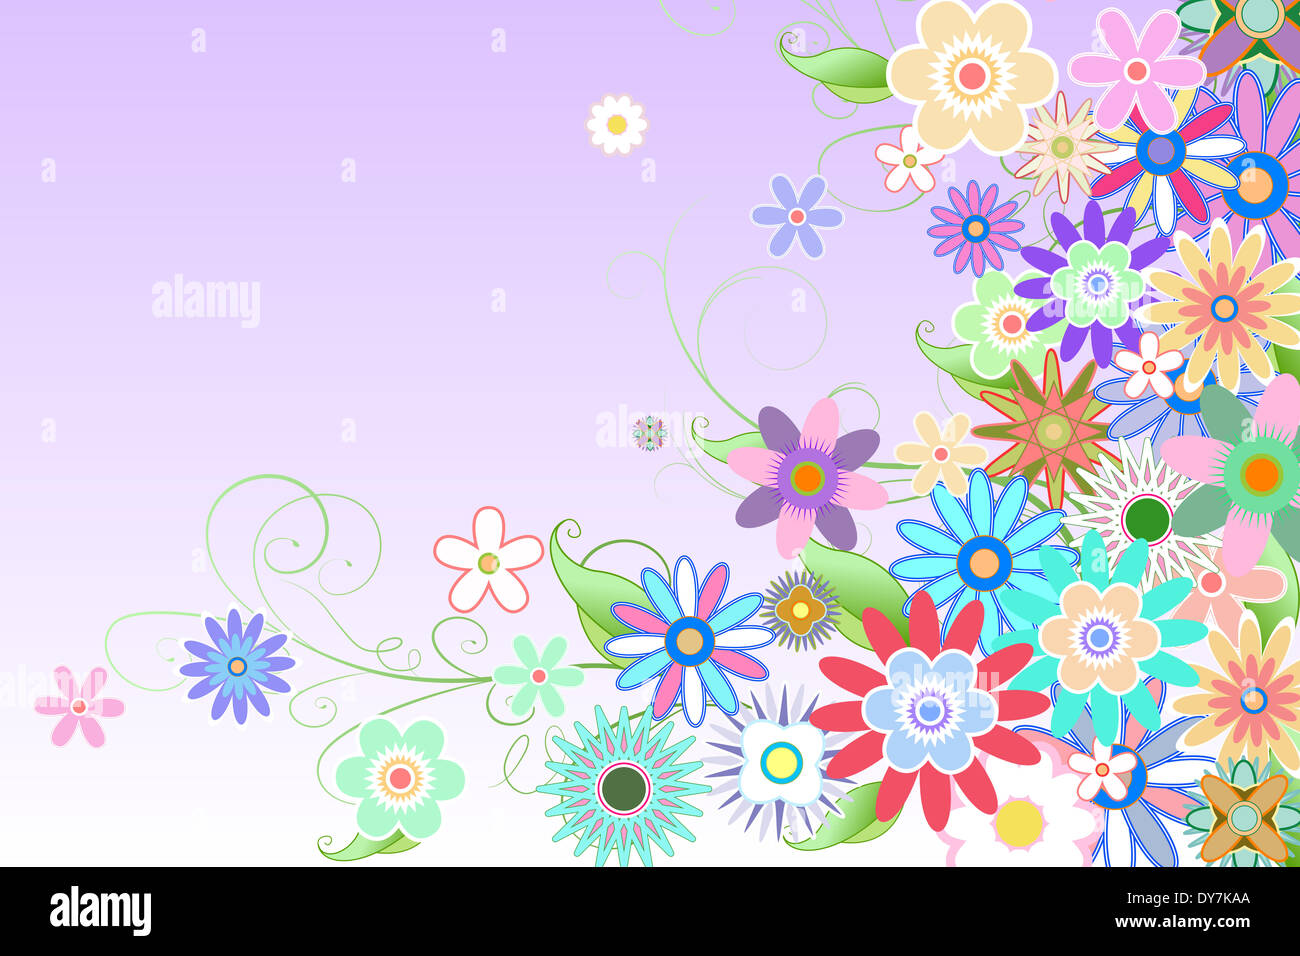 Digitally generated girly floral design Stock Photo